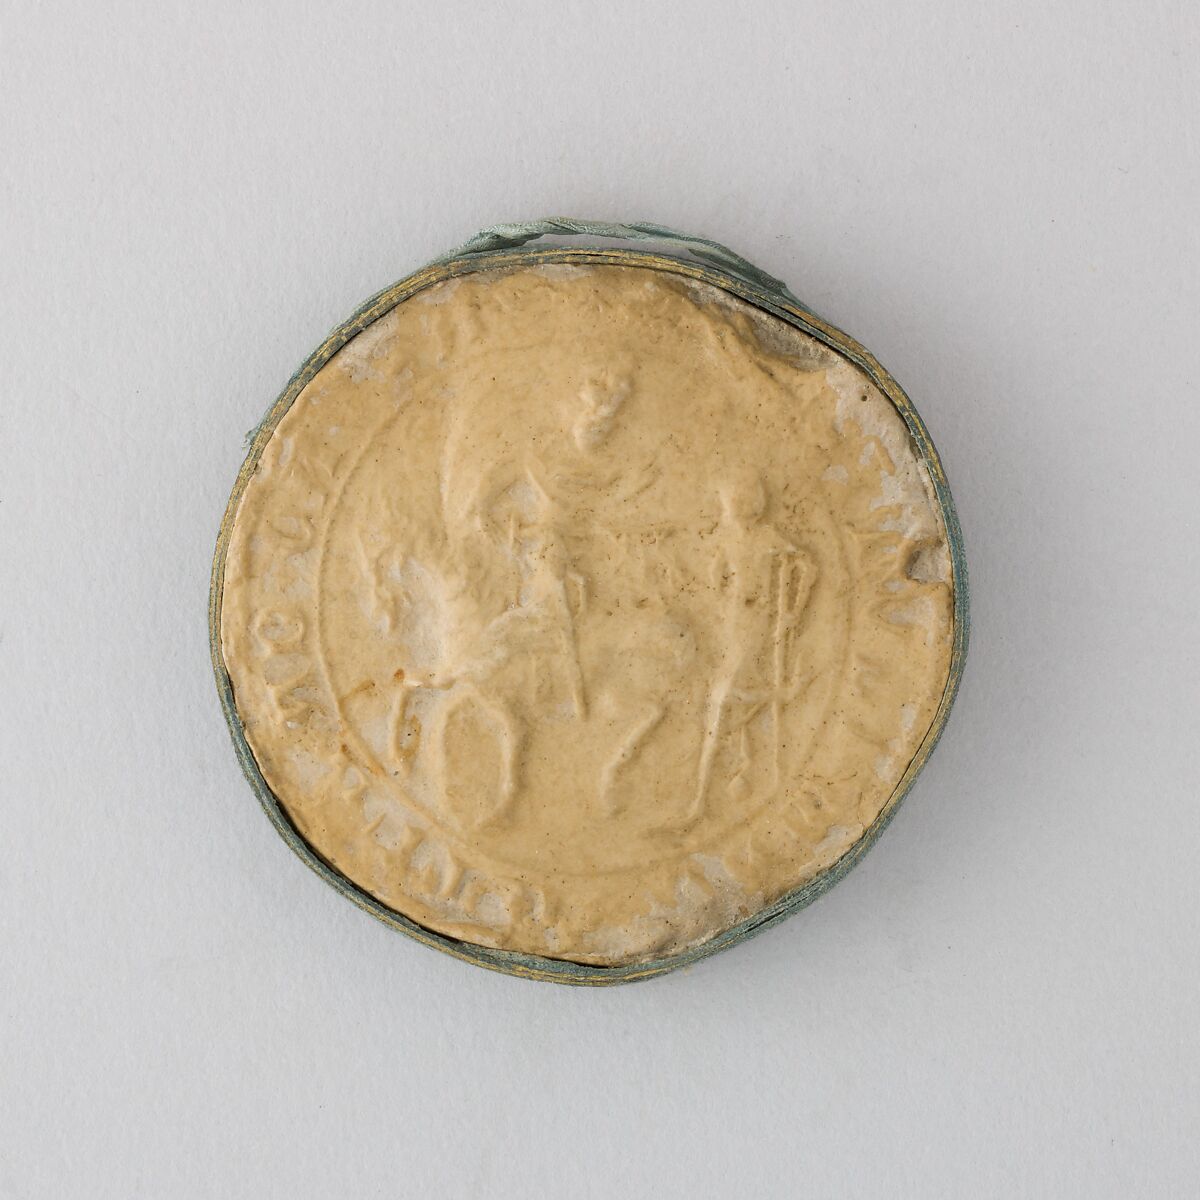 Reproduction of the Seal of St. Martin (capital of Mainz), L. 12th–14th century, Plaster, German 